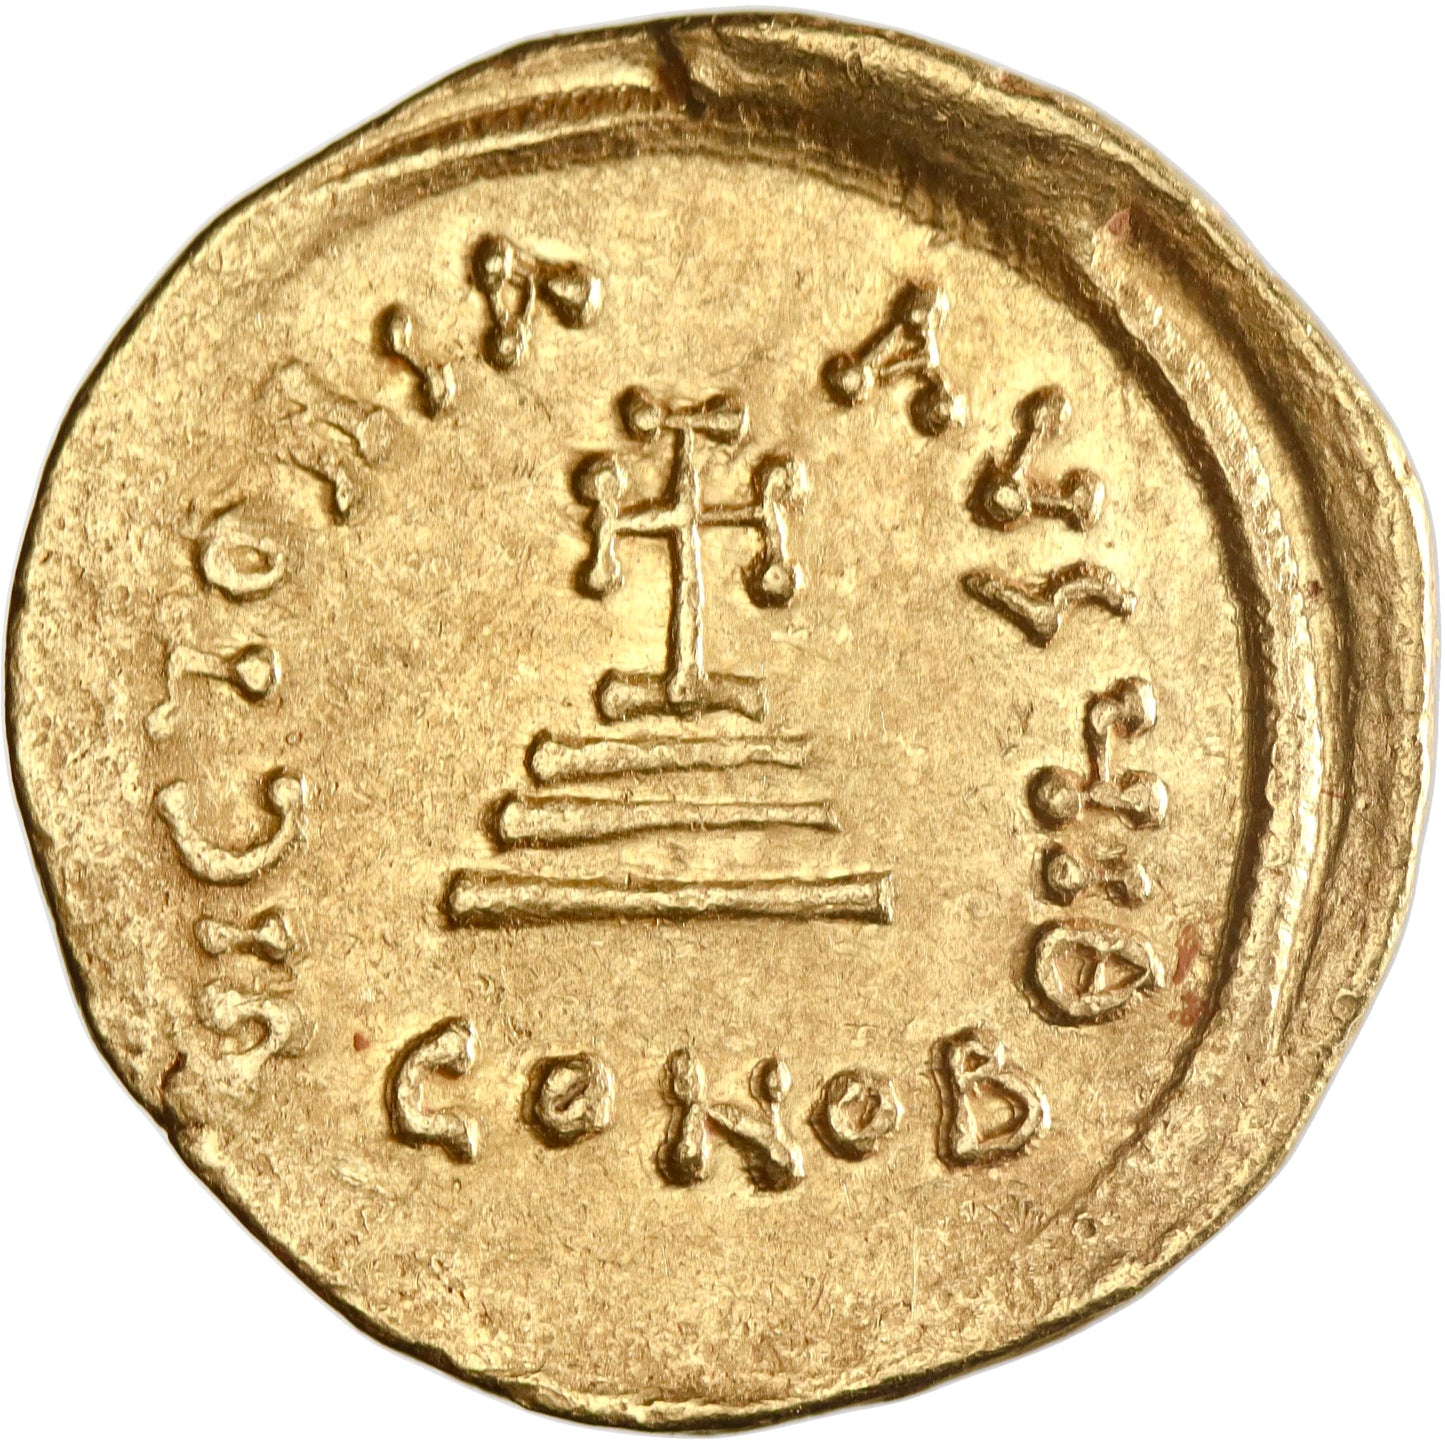 Byzantine, Heraclius, gold solidus, Constantinople mint, officina I_ (10th), 626-629 CE, Heraclius and Heraclius Constantine